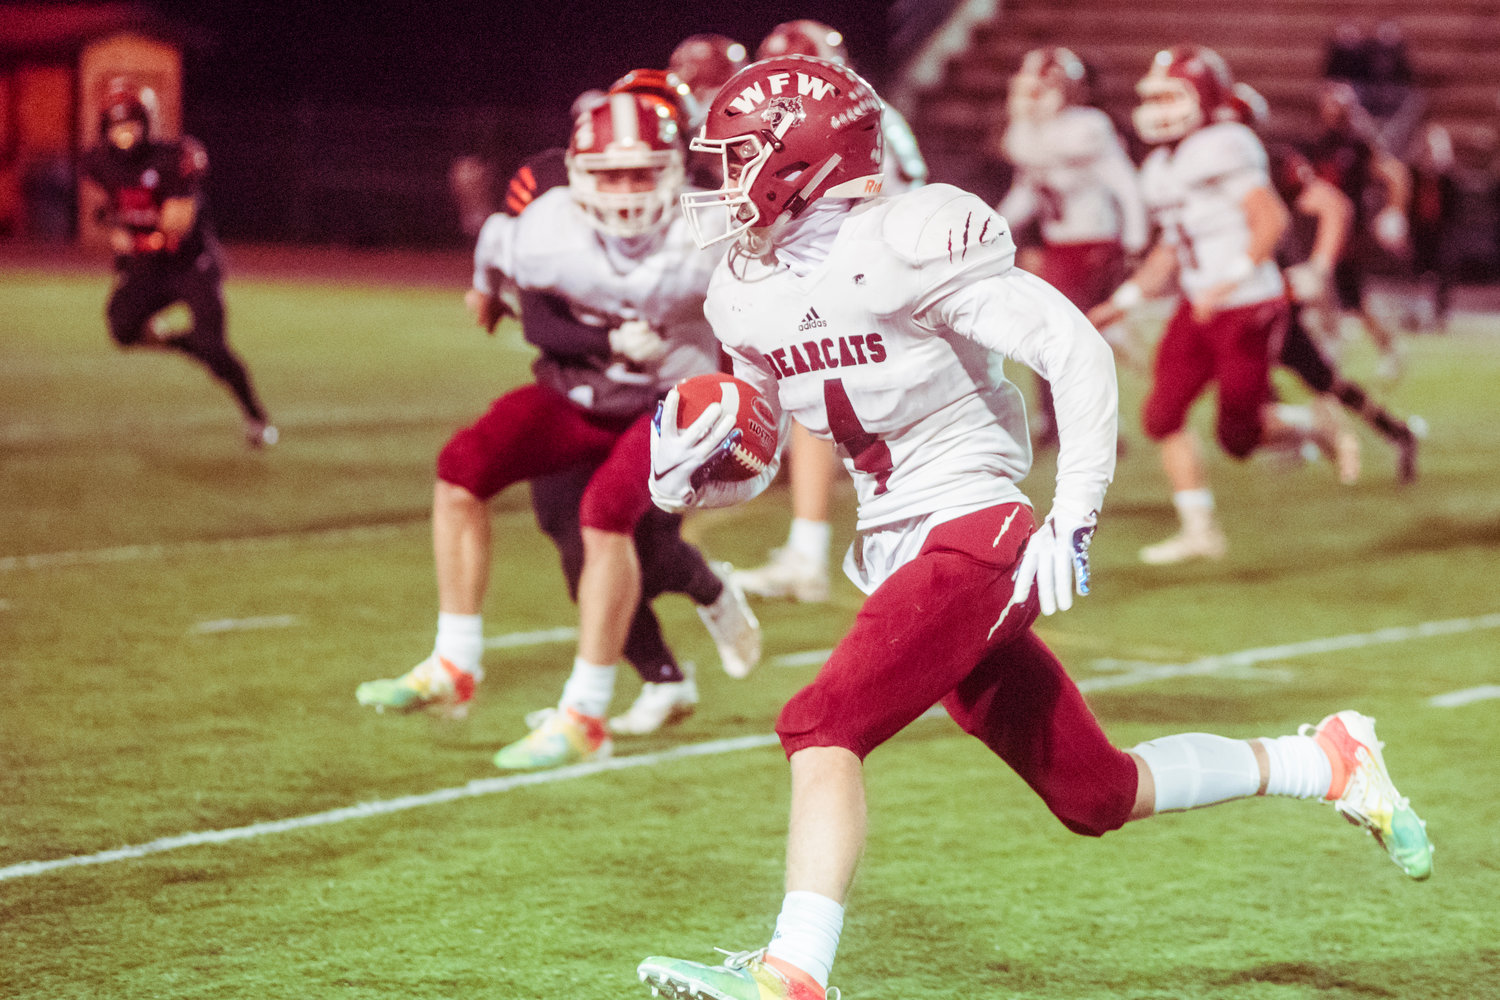 W.F. West's Cade Haller (4) runs with the football during the Swamp Cup game against Centralia Saturday night at Tiger Stadium.